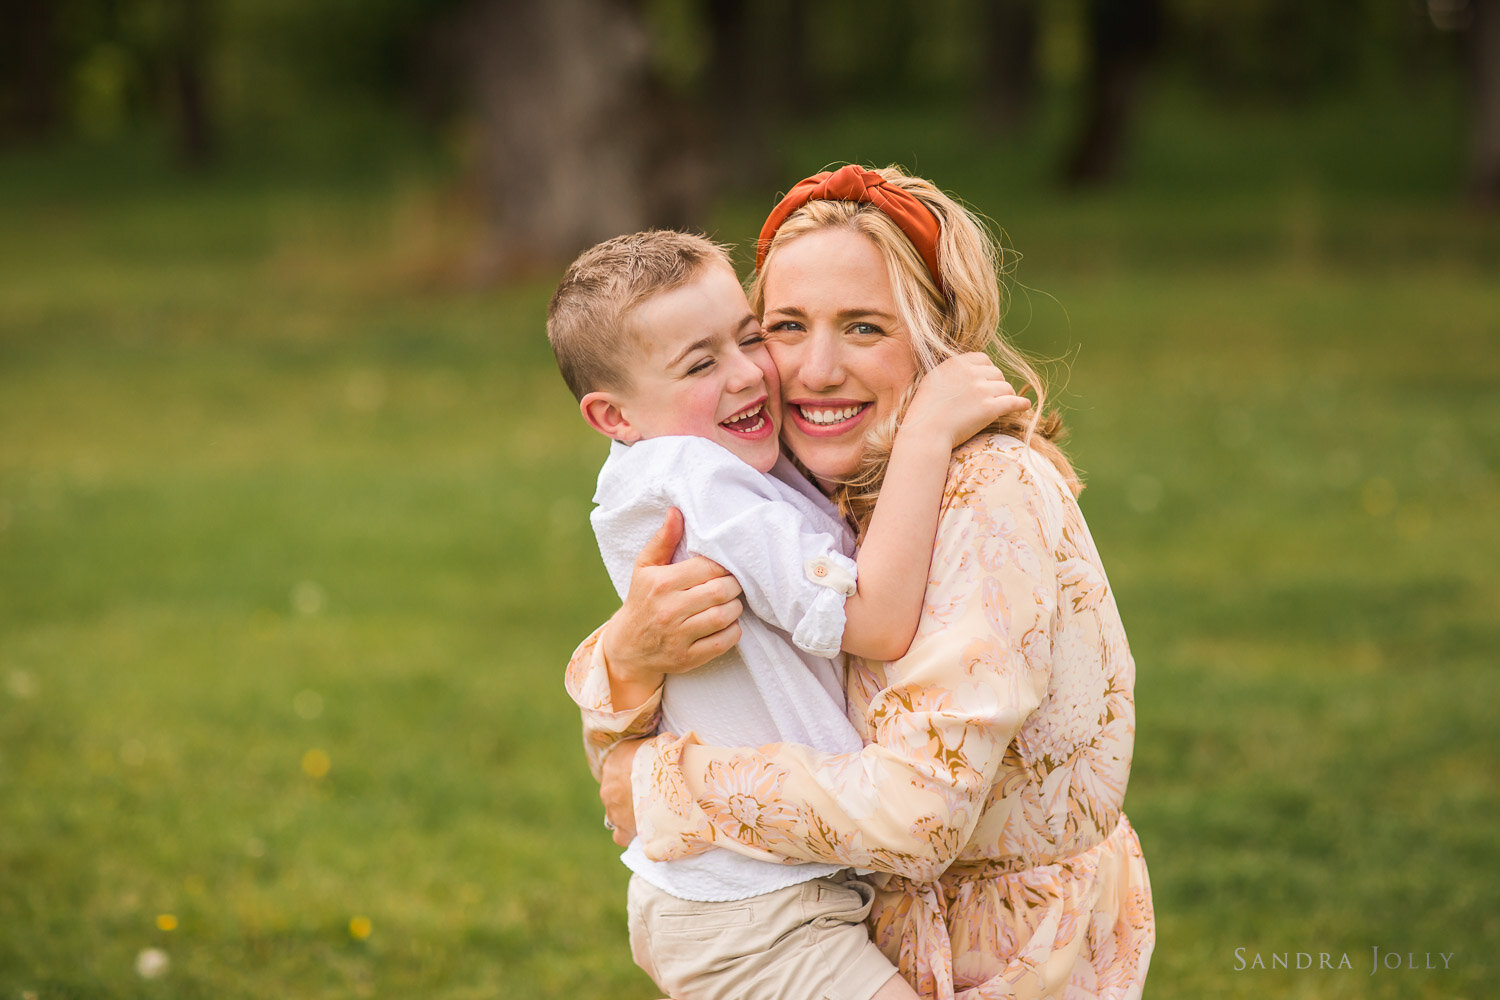 happy-mother-and-son-photo-session-at-ulriksdals-by-sandra-jolly-photography.jpg